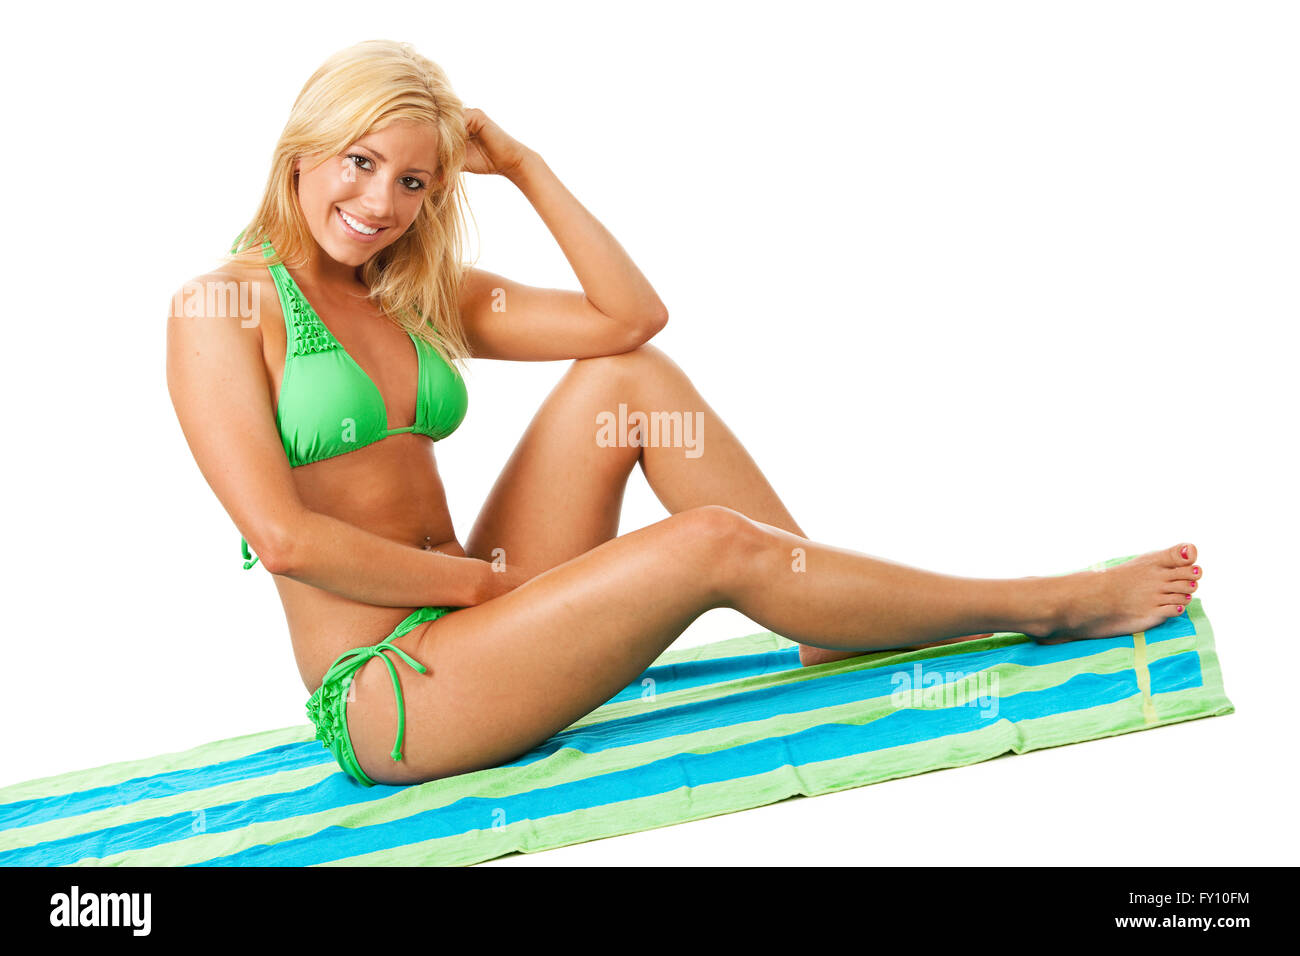 Attractive, trim, healthy Caucasian woman in bikini swimsuit.  Isolated on white background. Stock Photo